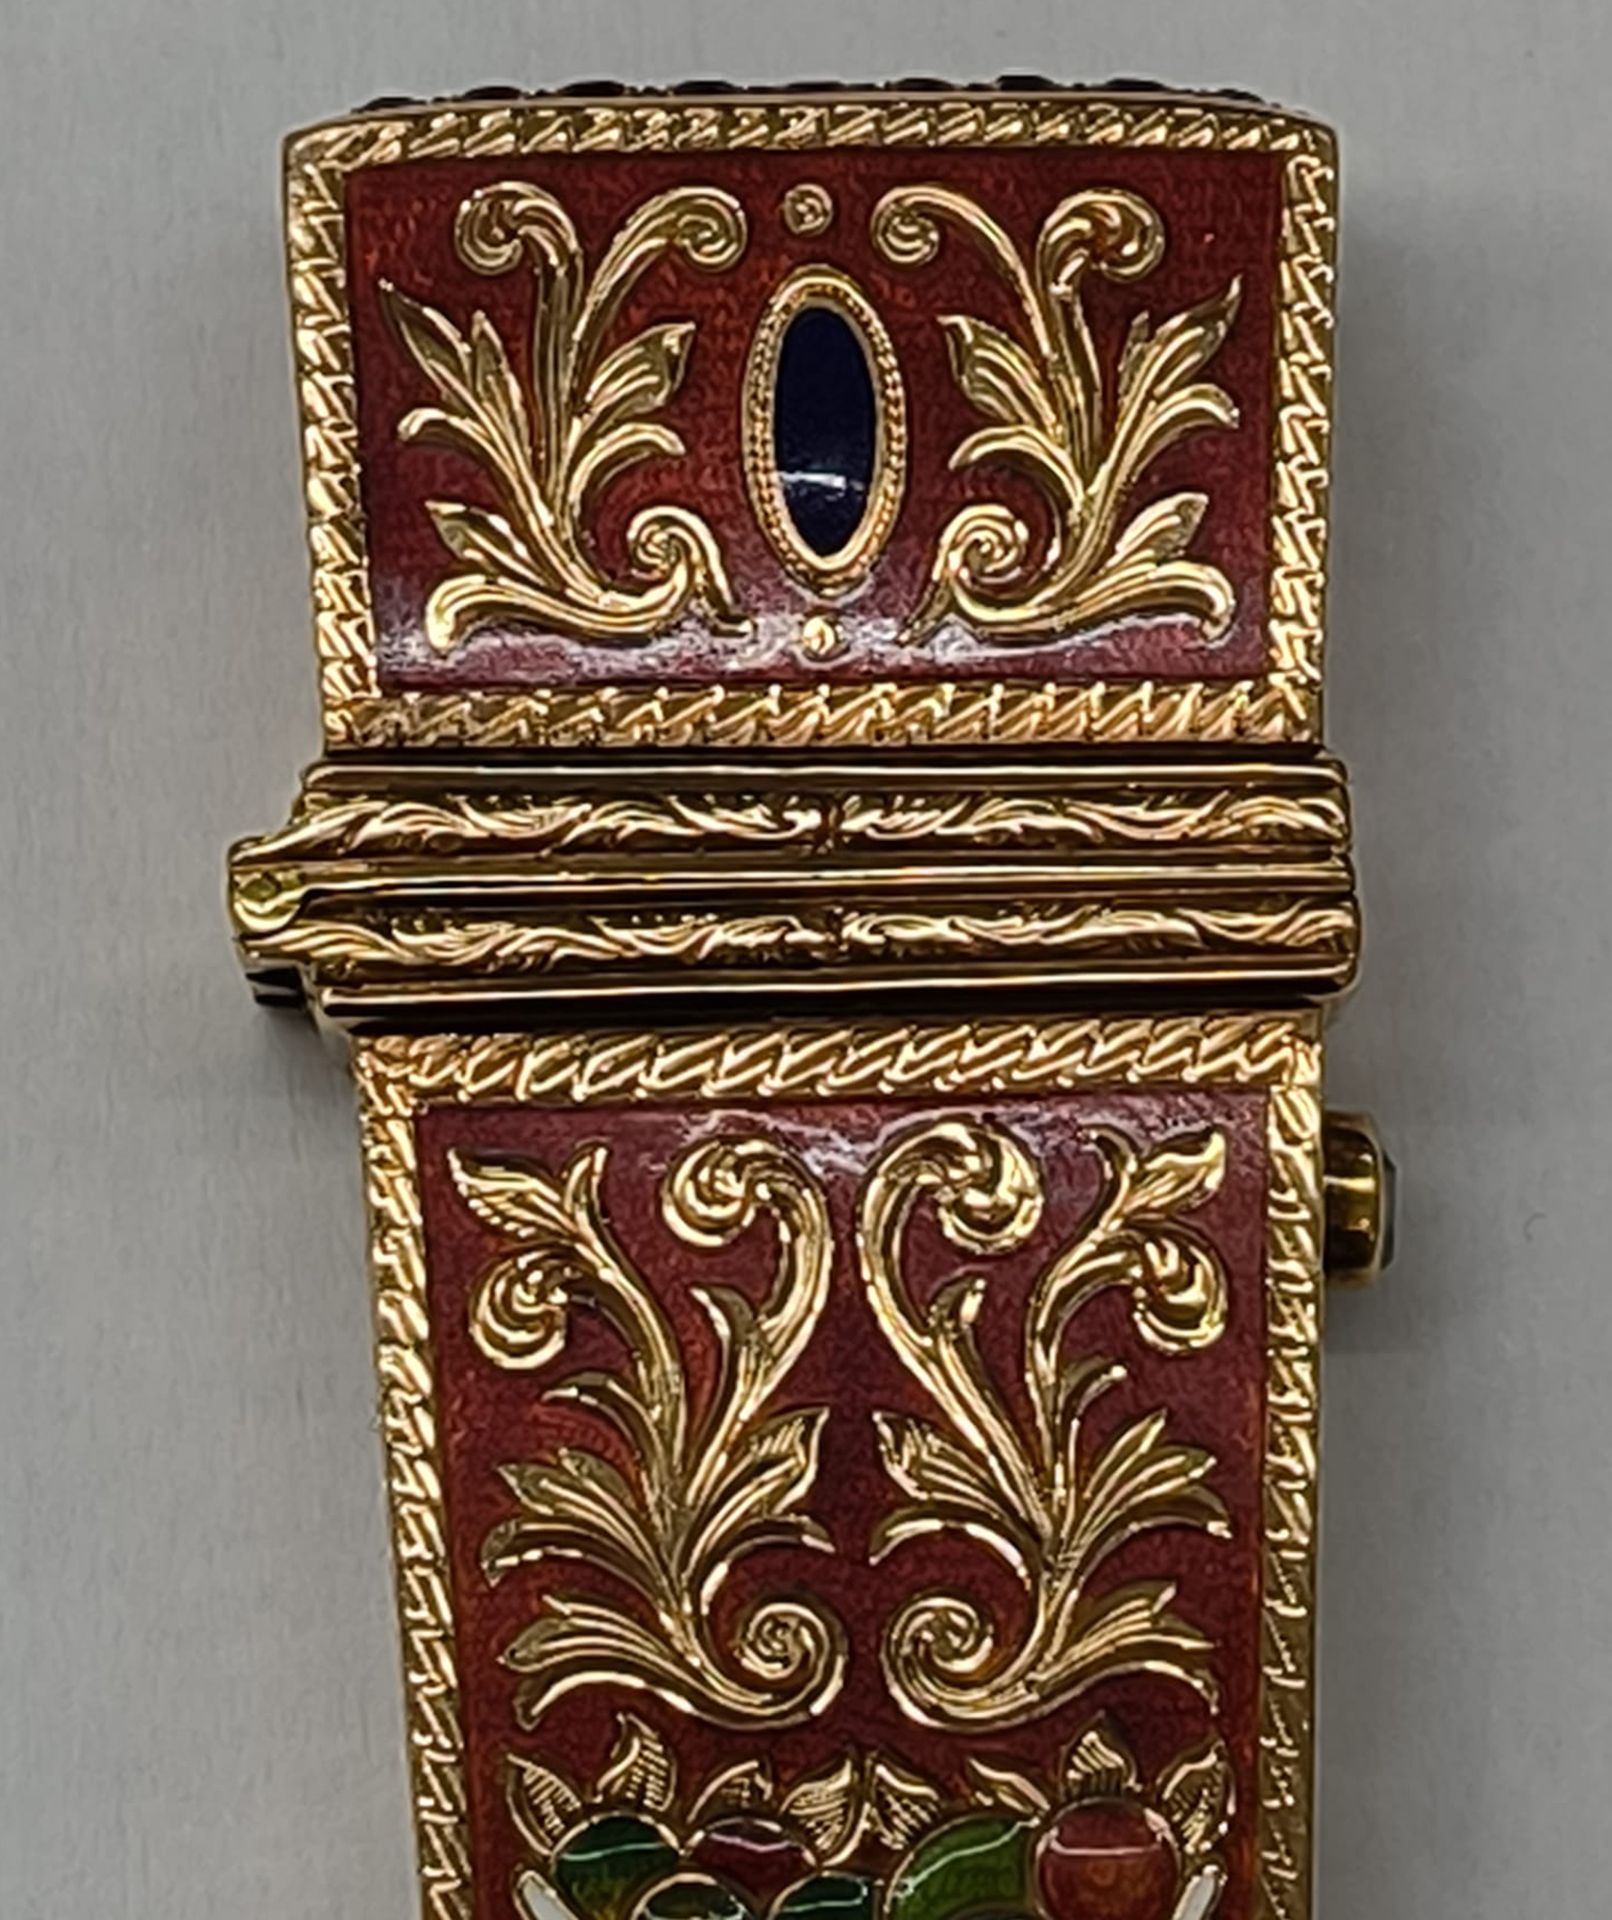 Etui in sterling gold and enamel set with rubies and old-cut diamond, Russian work from the early 20 - Image 3 of 8